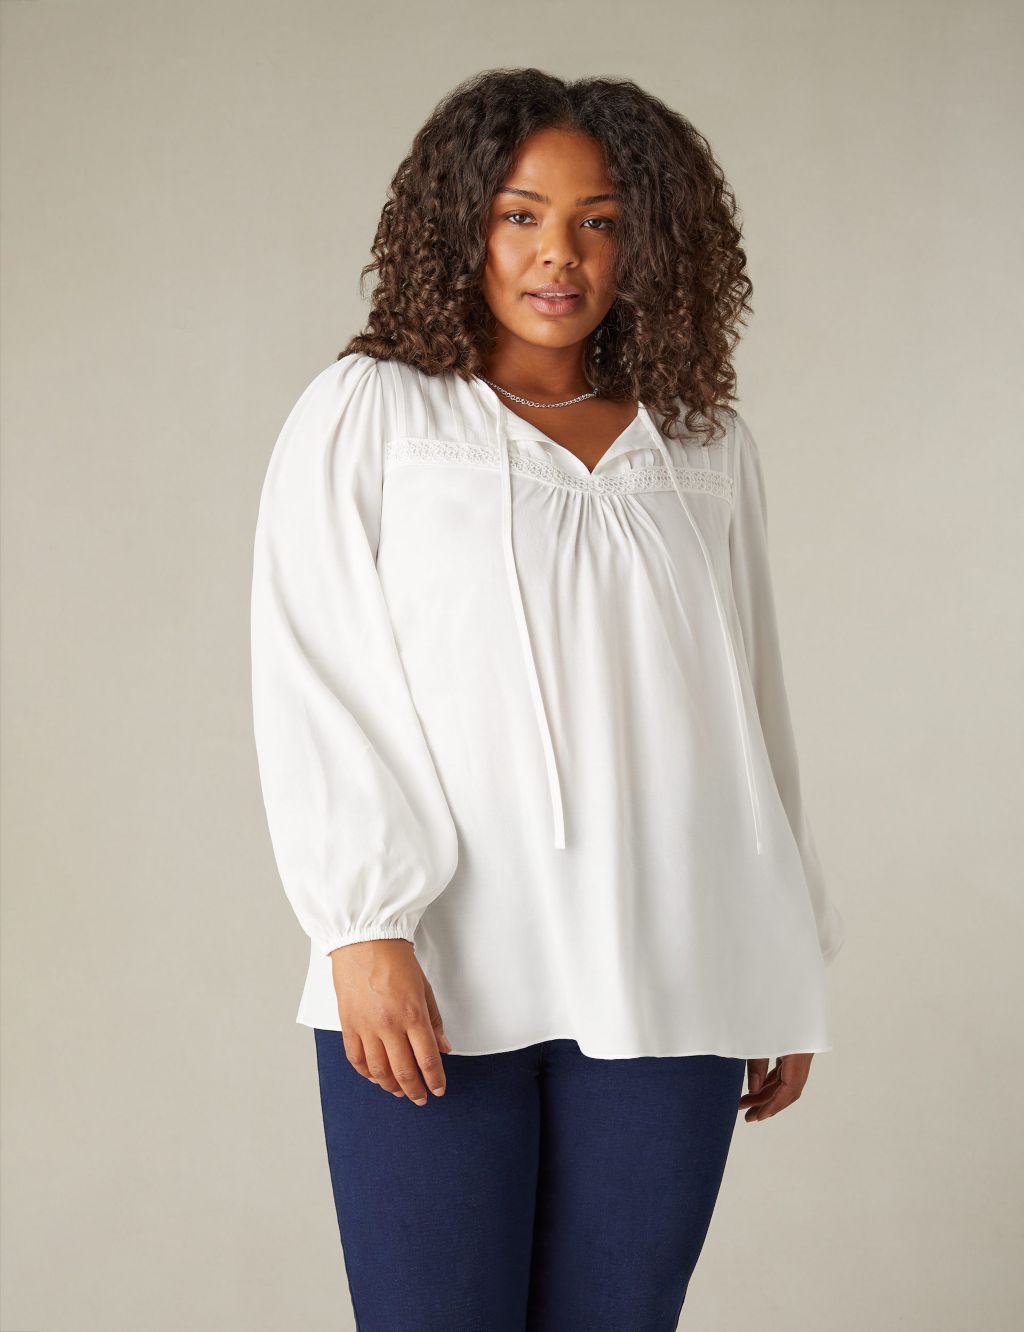 Page 2 - Women’s White Shirts & Blouses | M&S